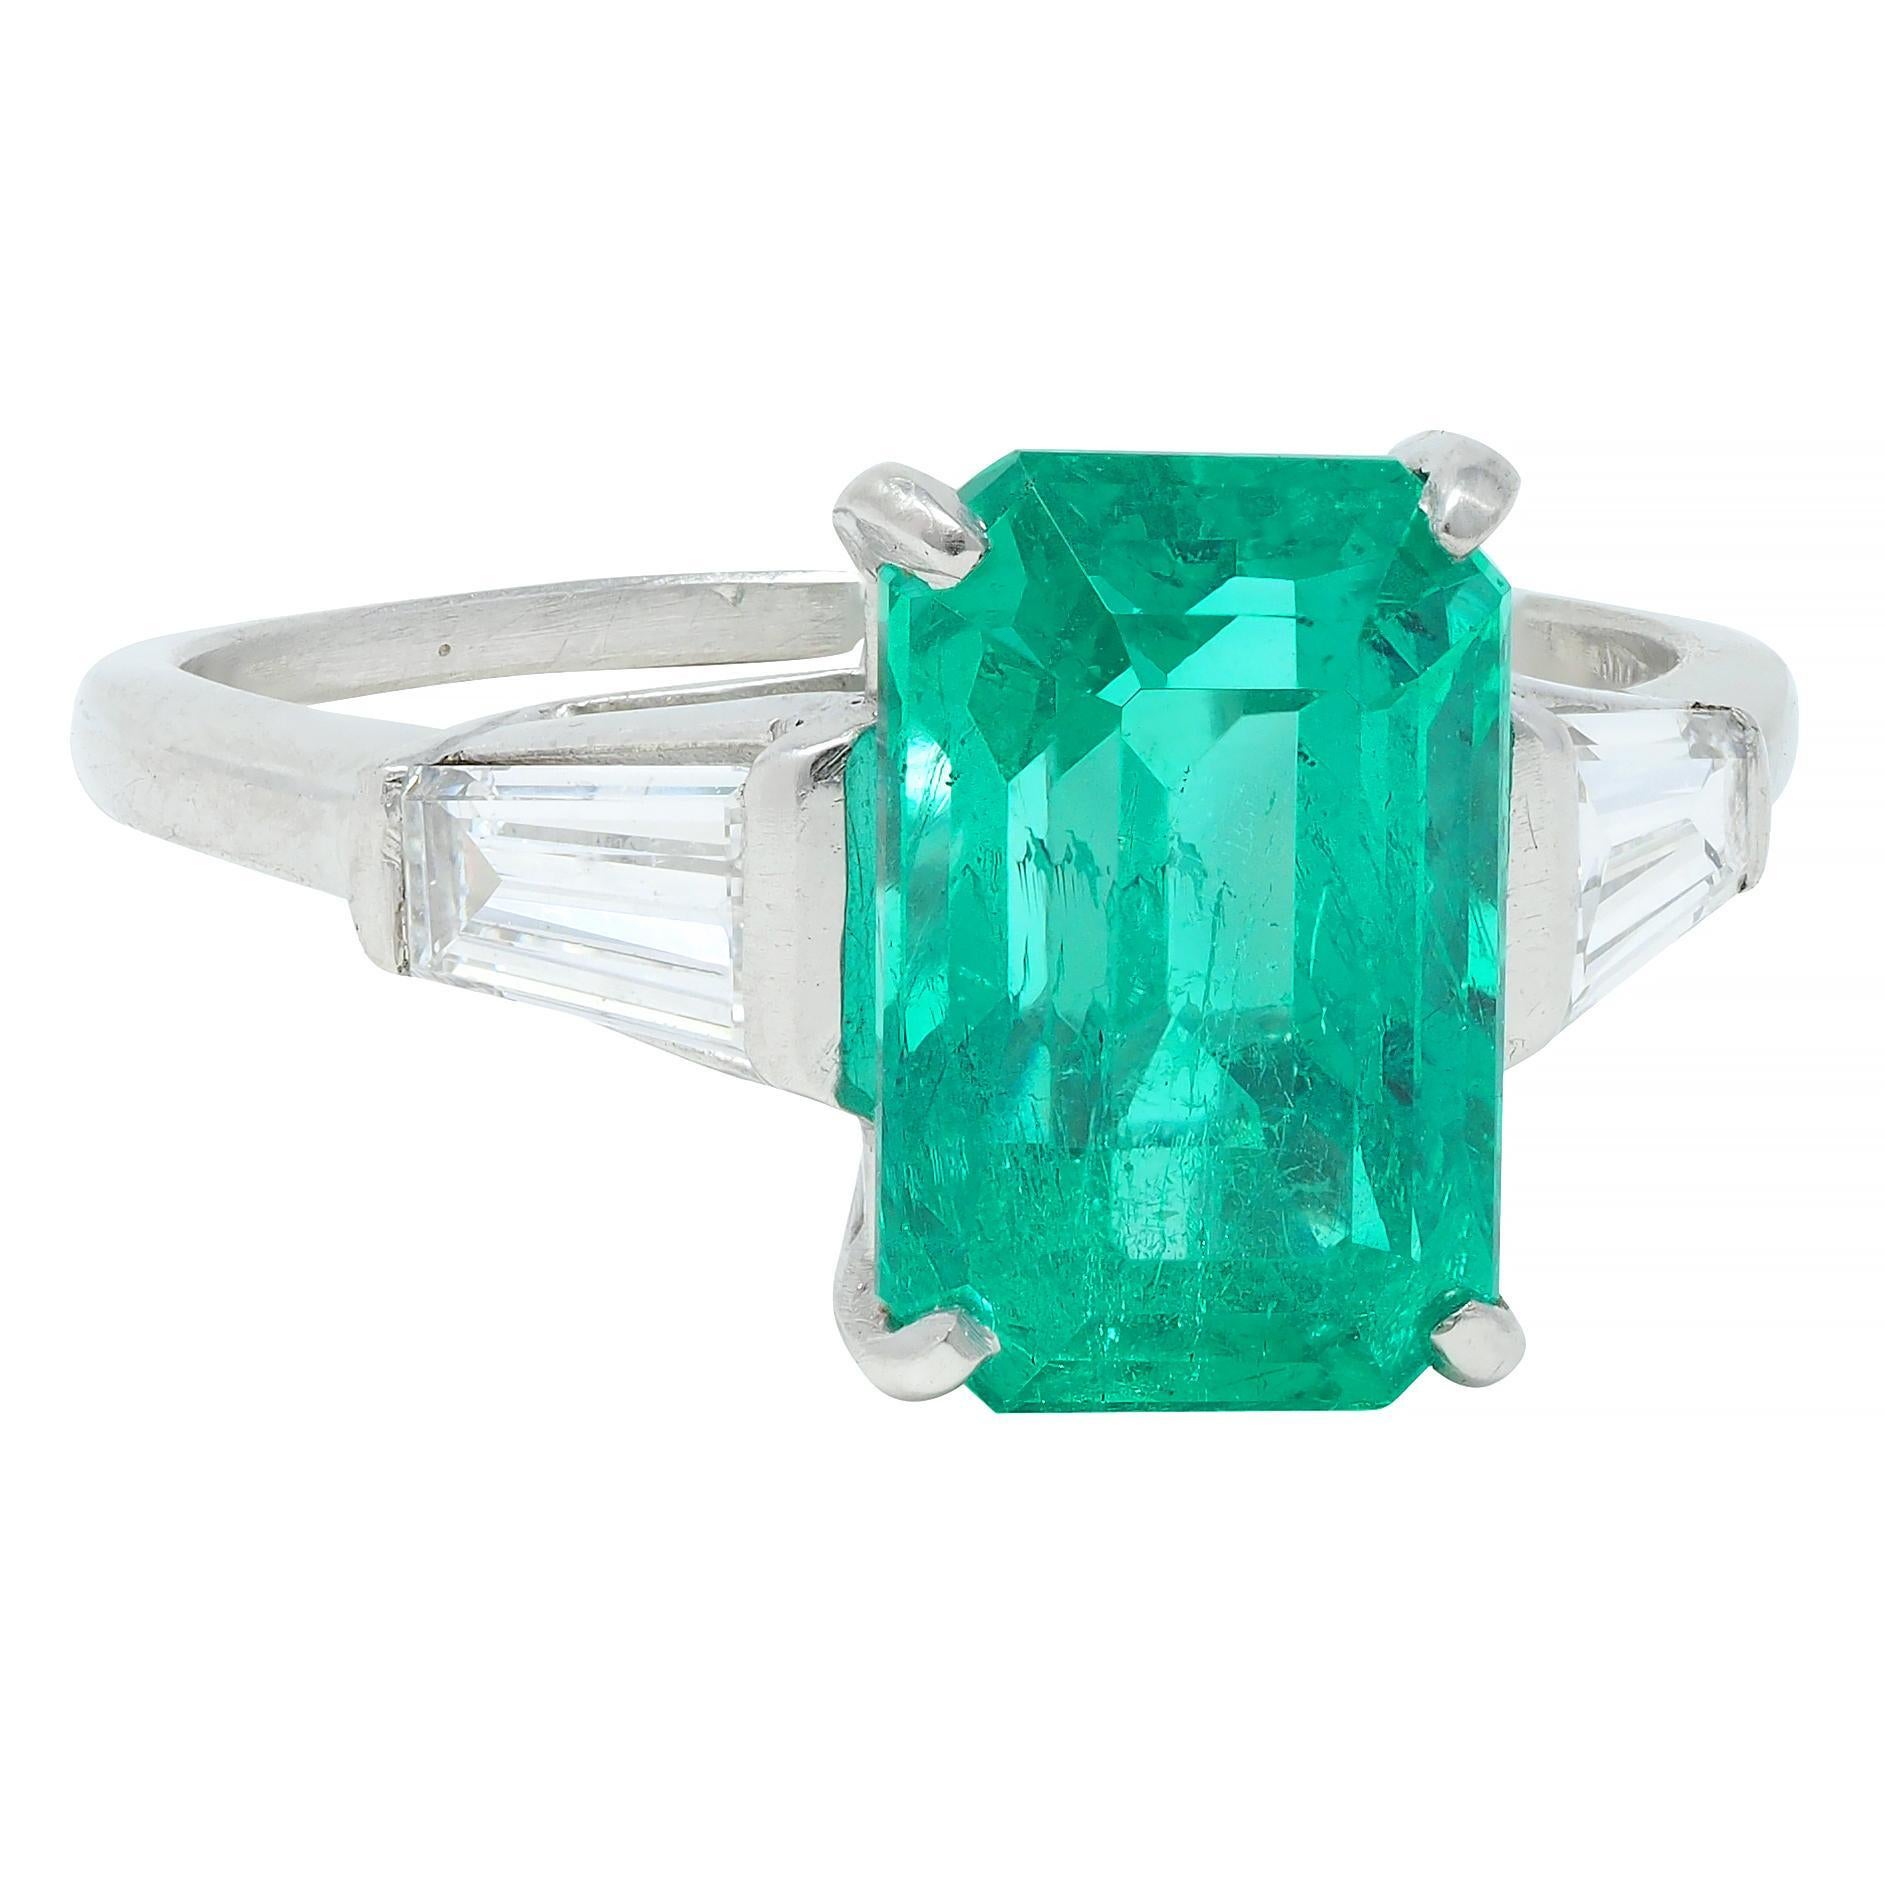 Centering an emerald cut emerald weighing 2.93 carats total - transparent medium green
Natural Colombian in origin and displaying minor traditional clarity enhancement 
Prong set in basket and flanked by tapered baguette cut diamonds
Weighing